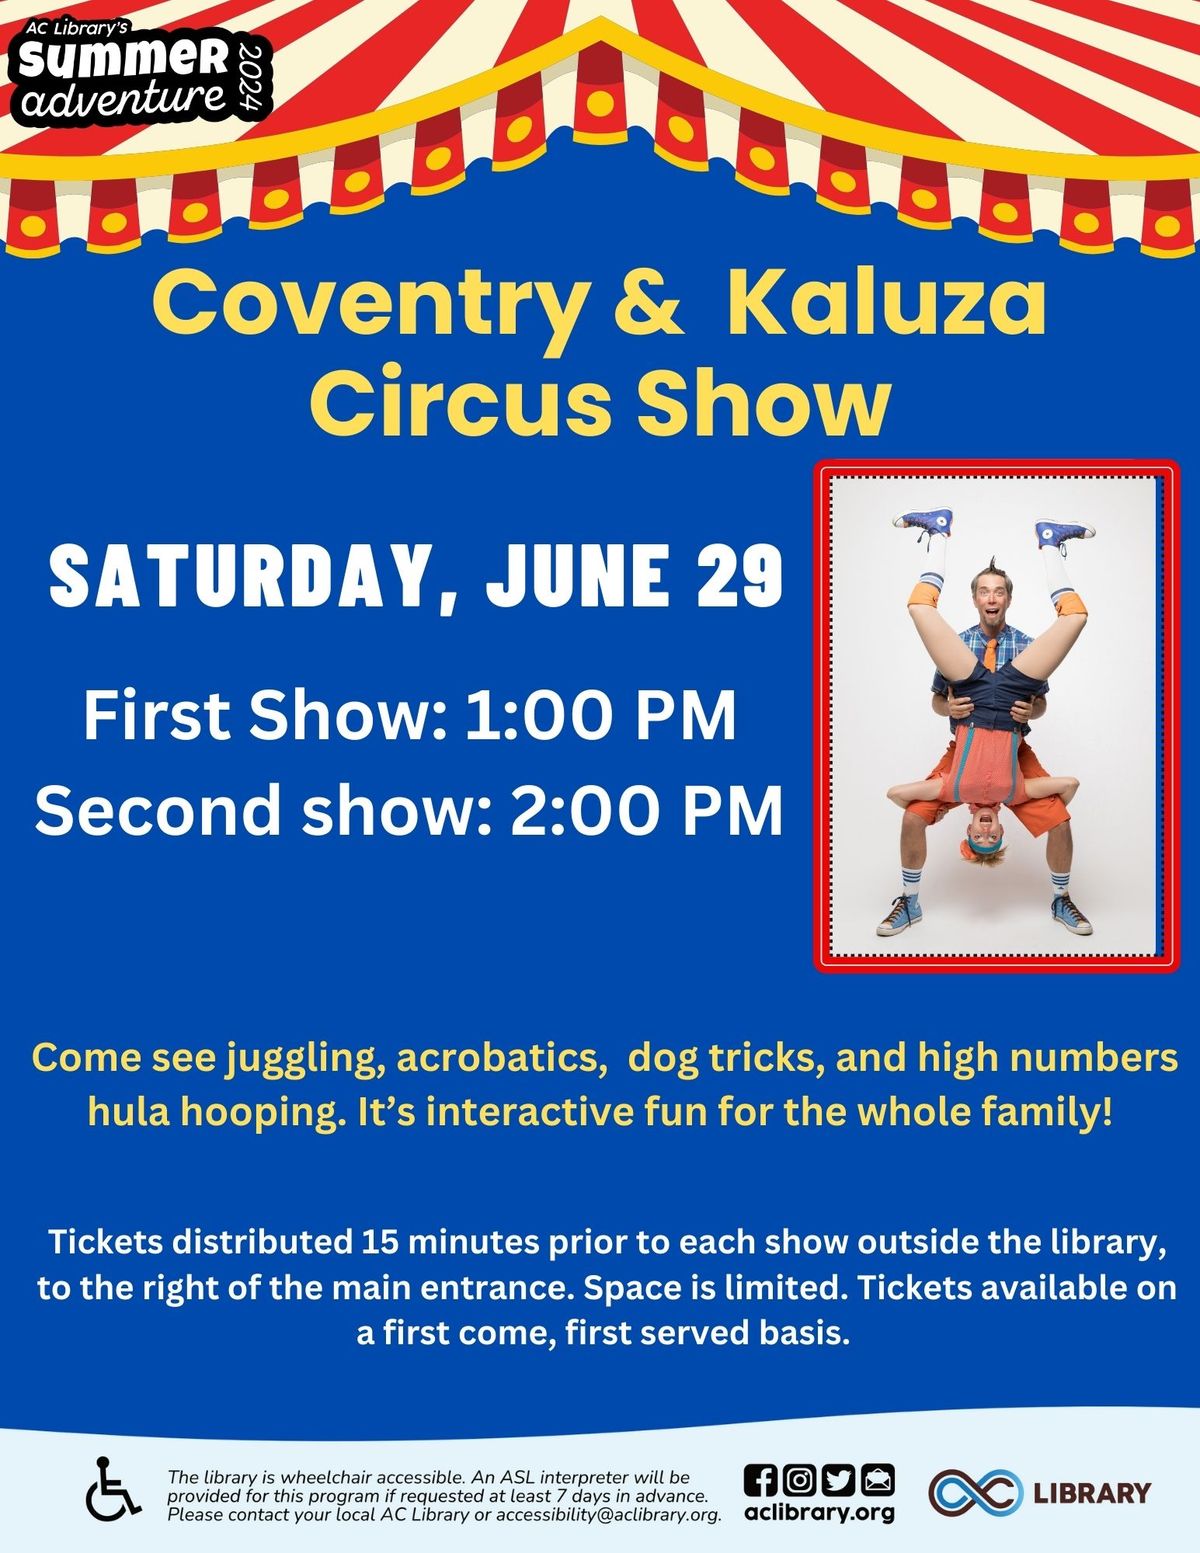 Coventry & Kaluza Circus Show @ Fremont Main Library